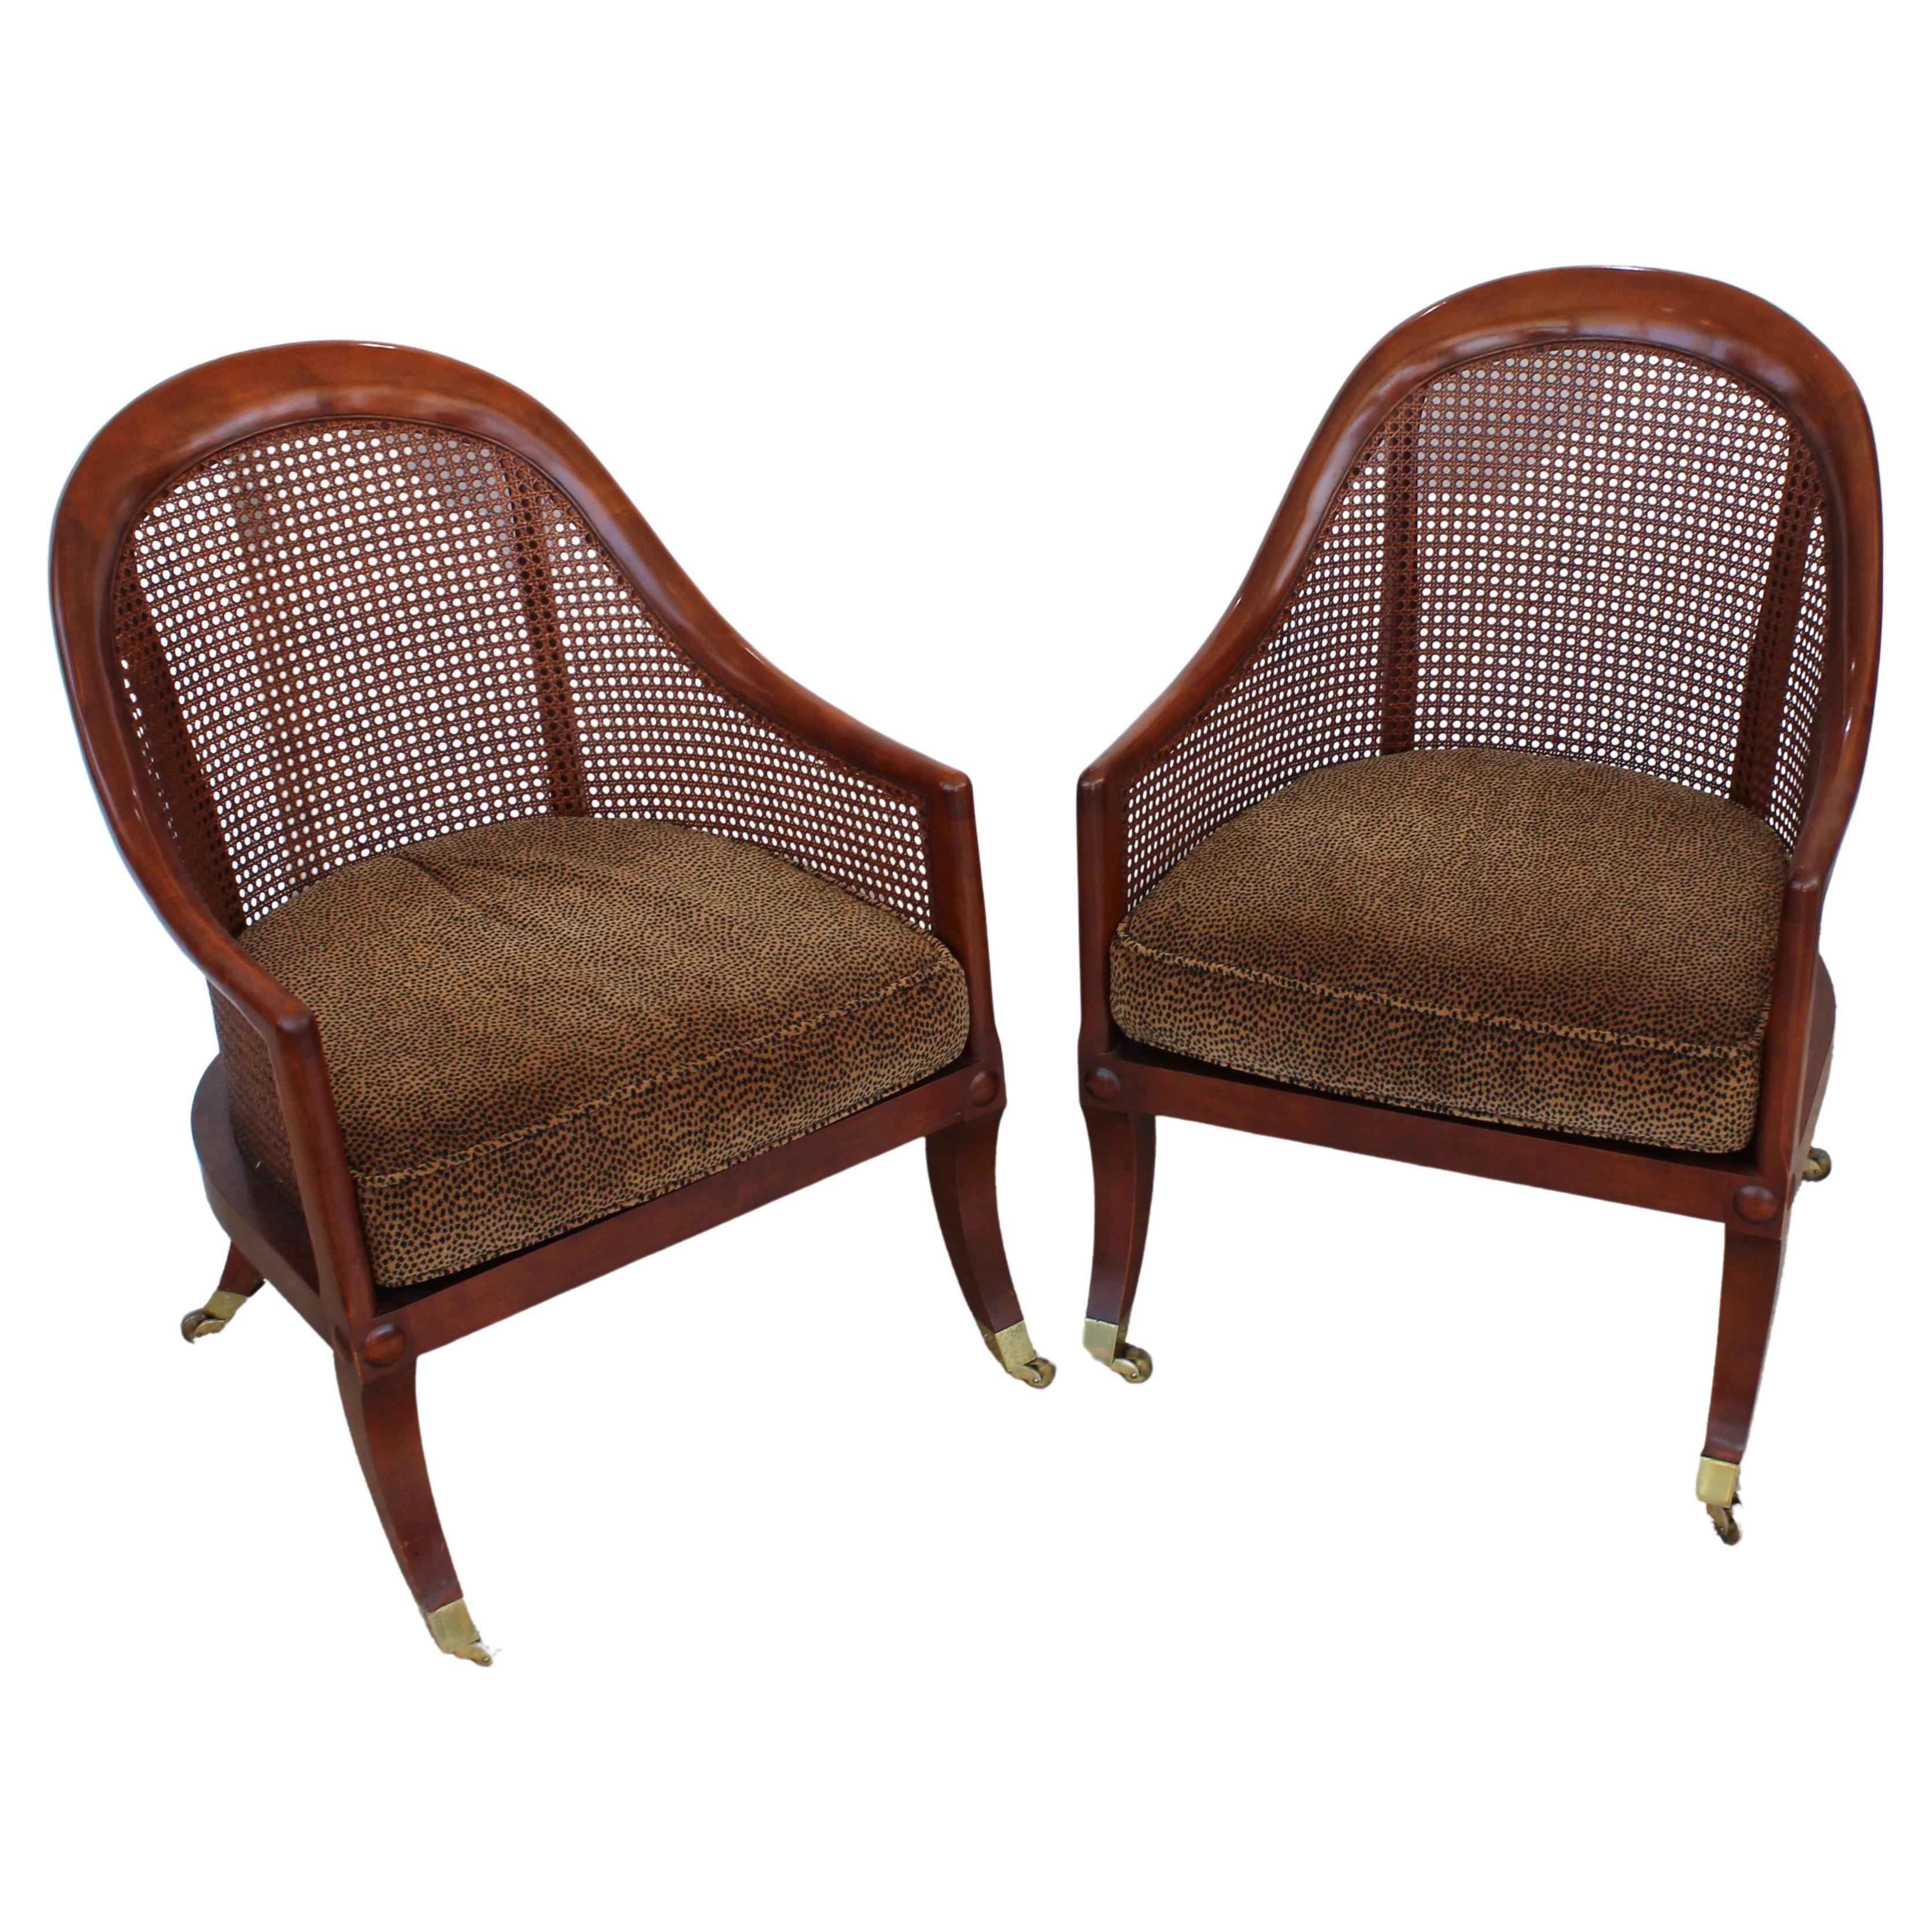 Pair of English Regency Style Chairs by Baker Furniture